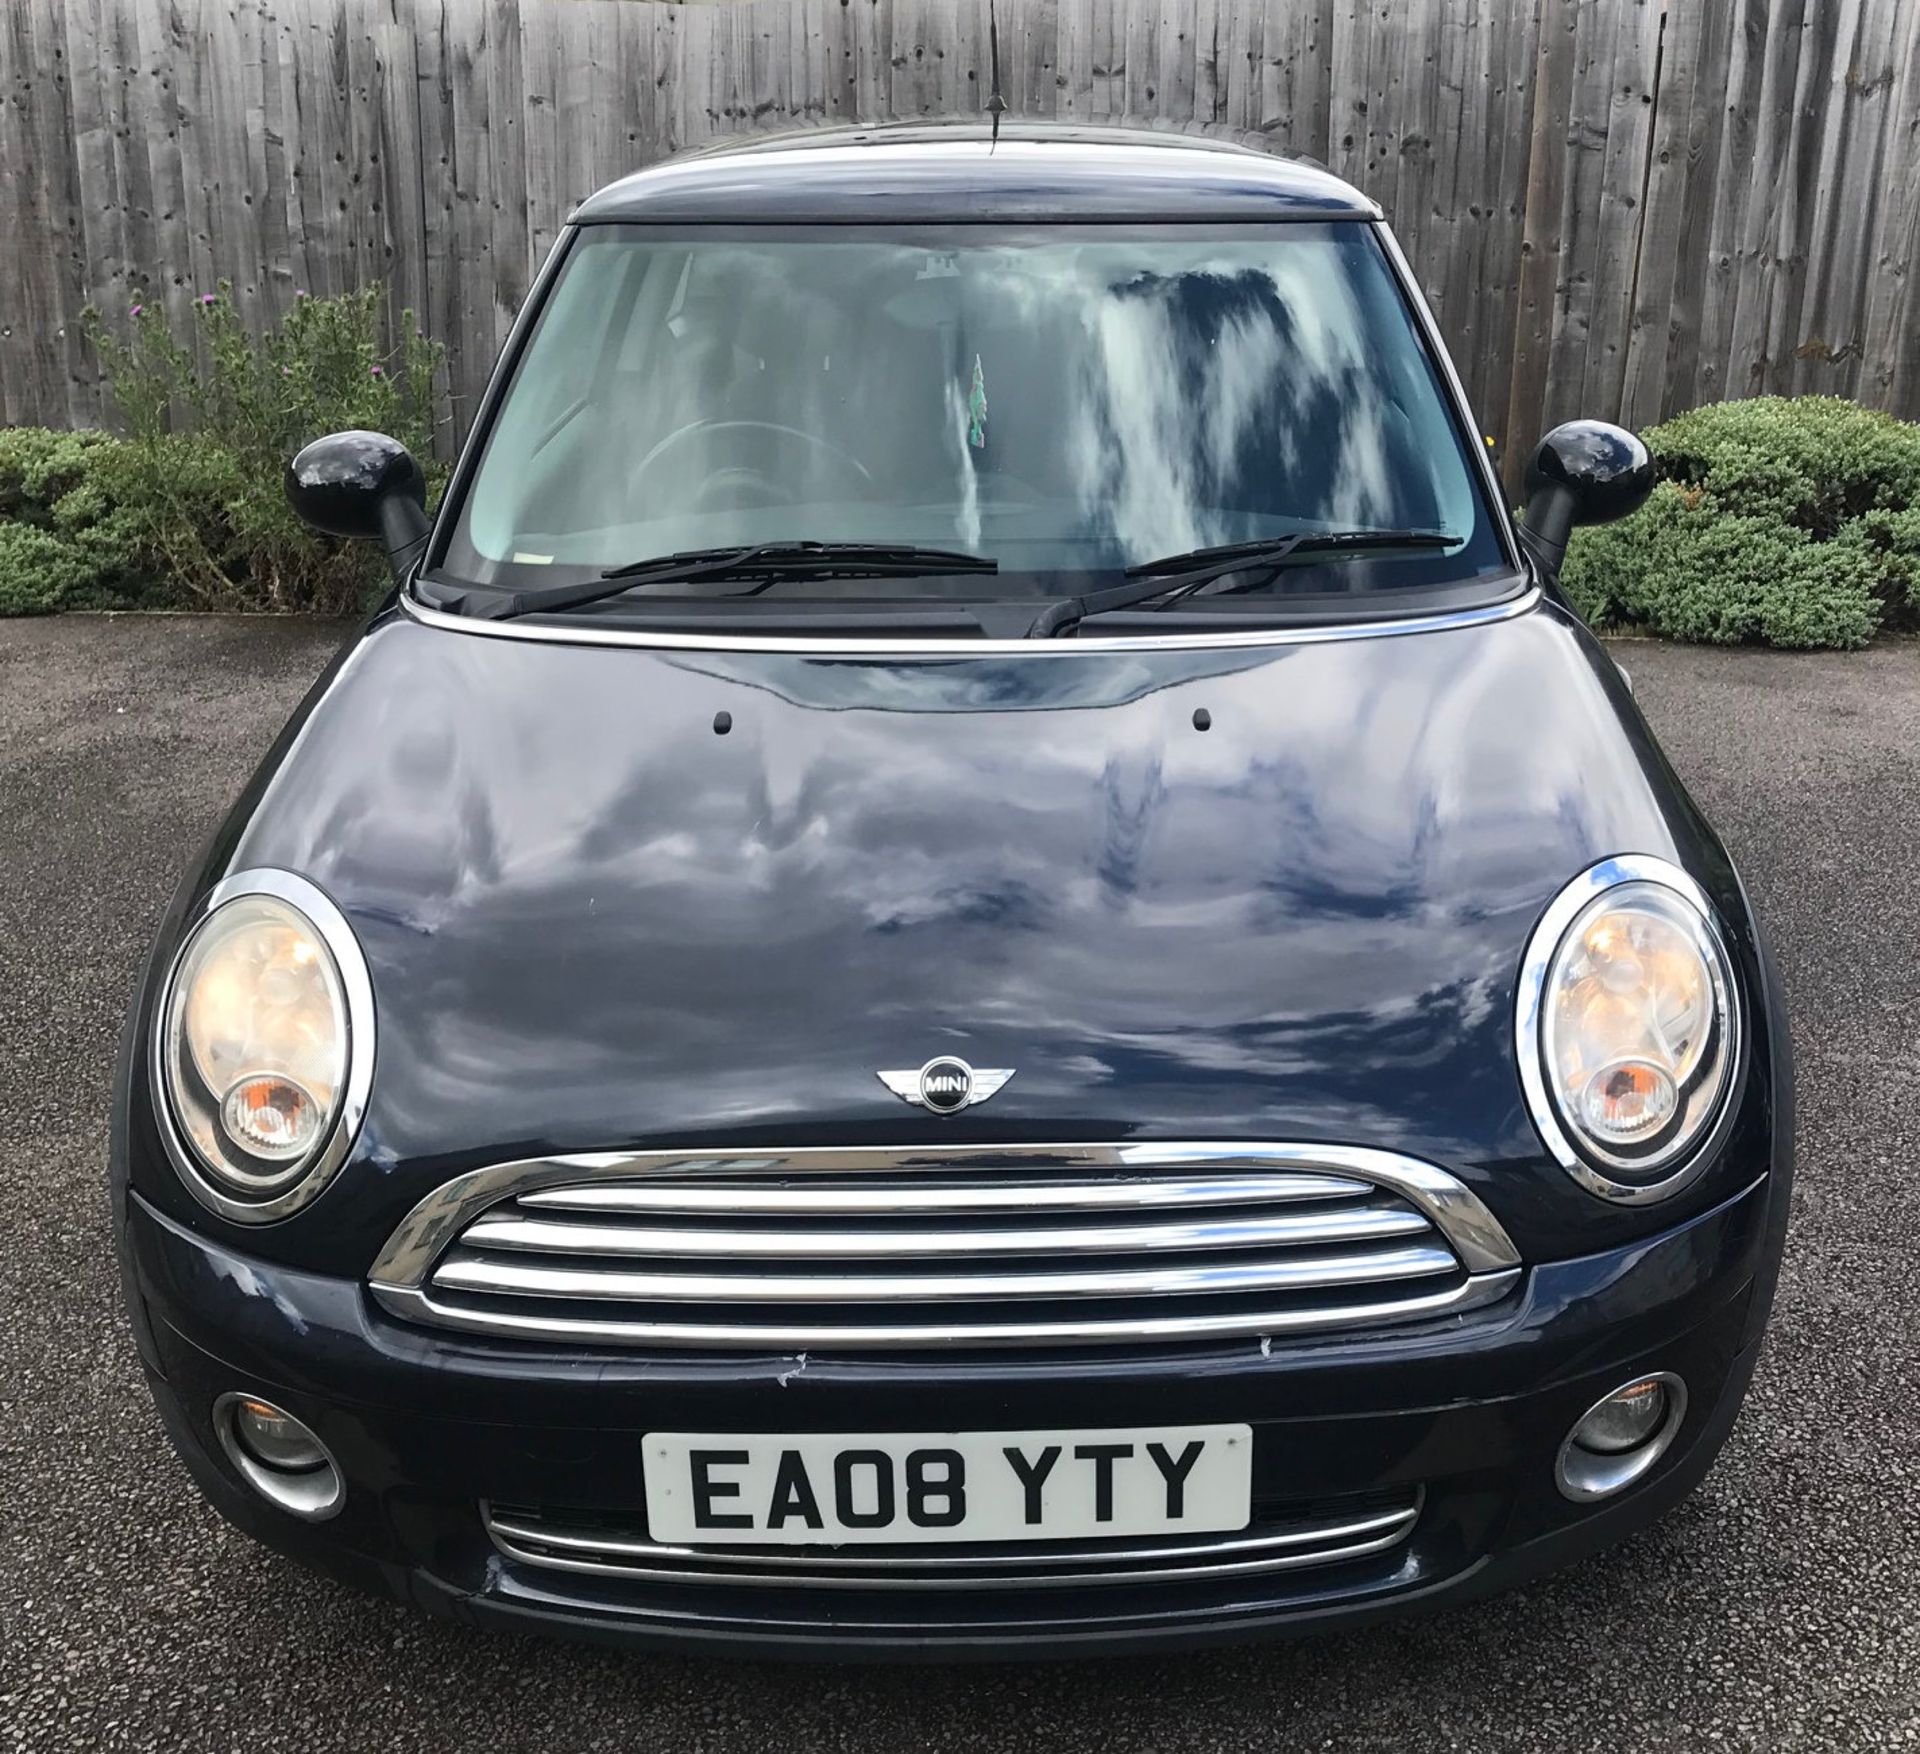 2008 Mini One 1.4 3 Dr Hatchback - CL505 - NO VAT ON THE HAMMER - Location: Corby, Northamptonshire - Image 7 of 14